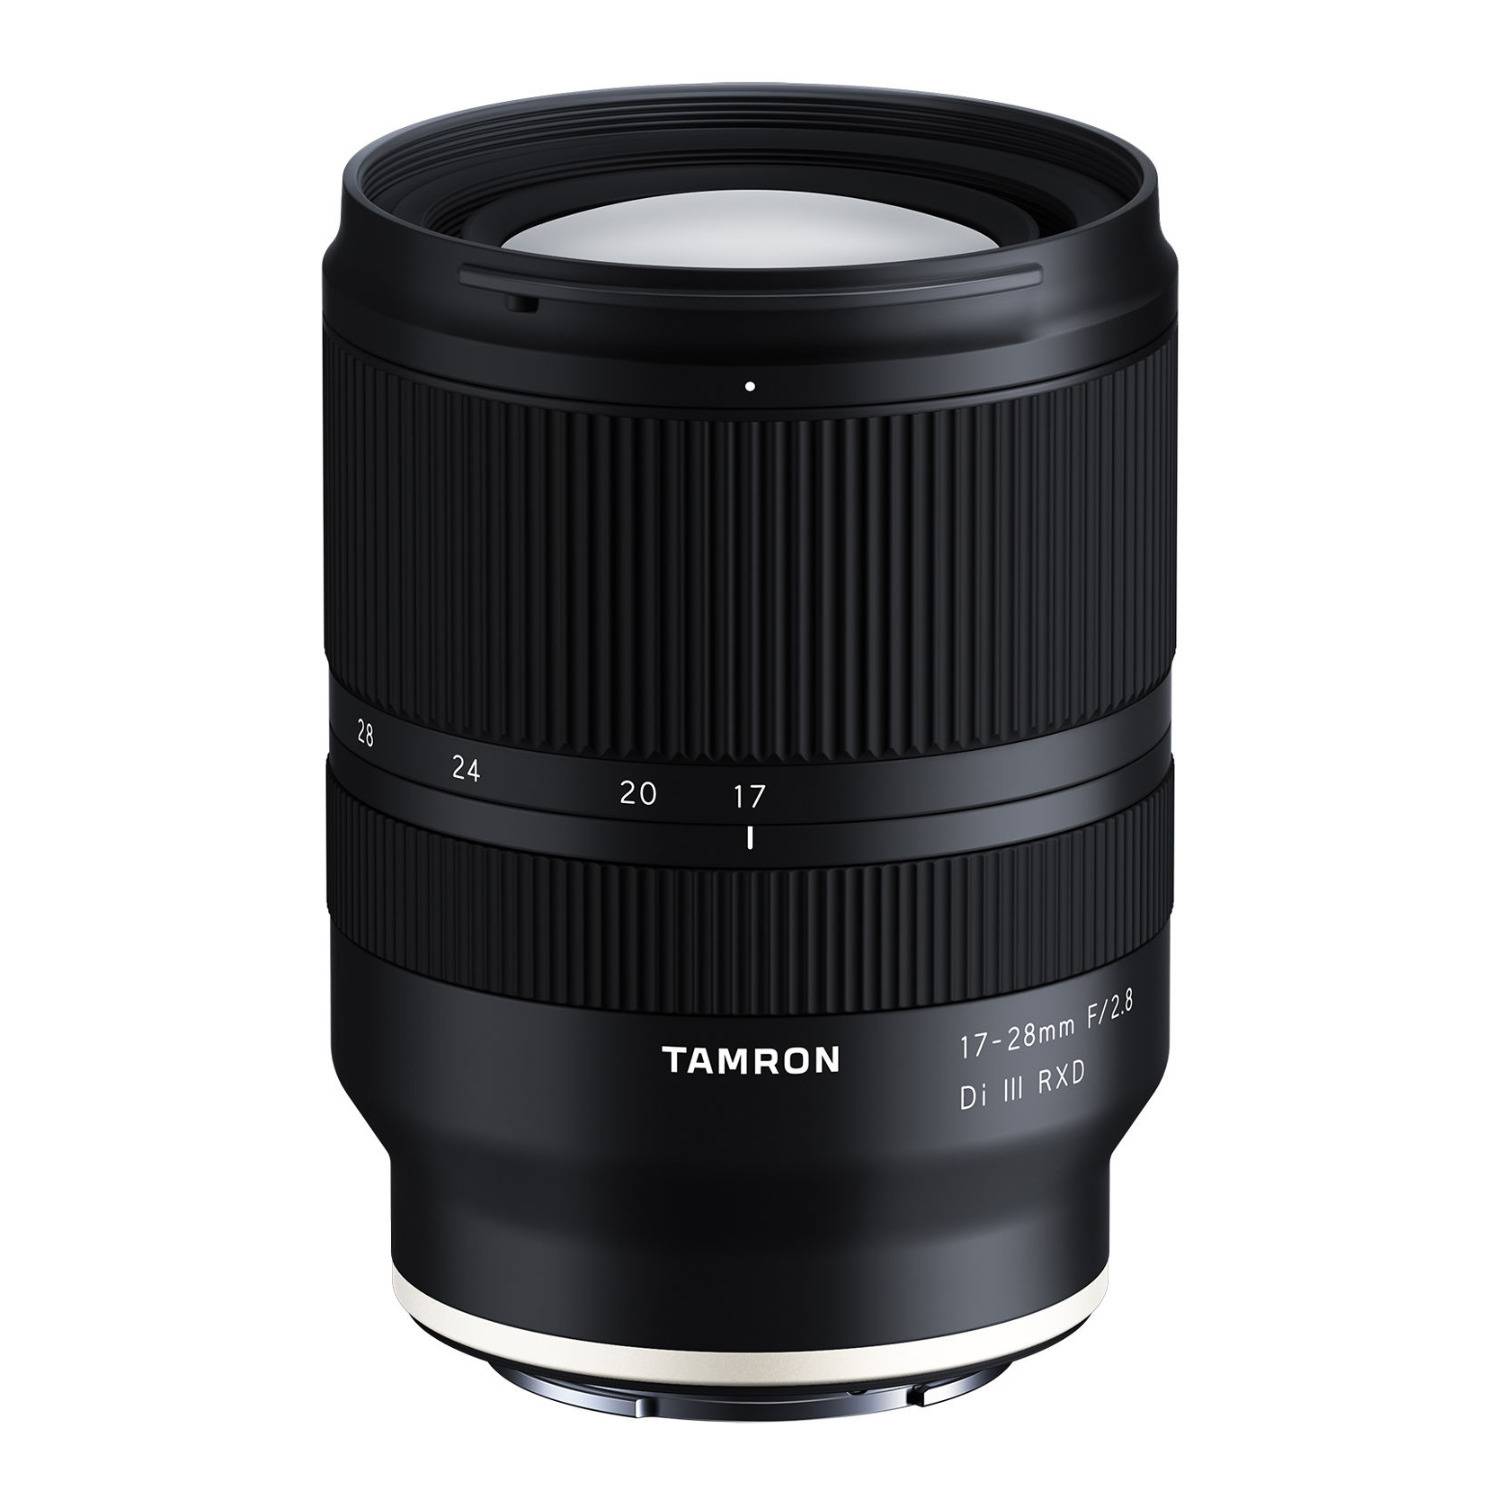 Tamron Di III RXD 17-28mm f/2.8 Lens for Sony E-Mount